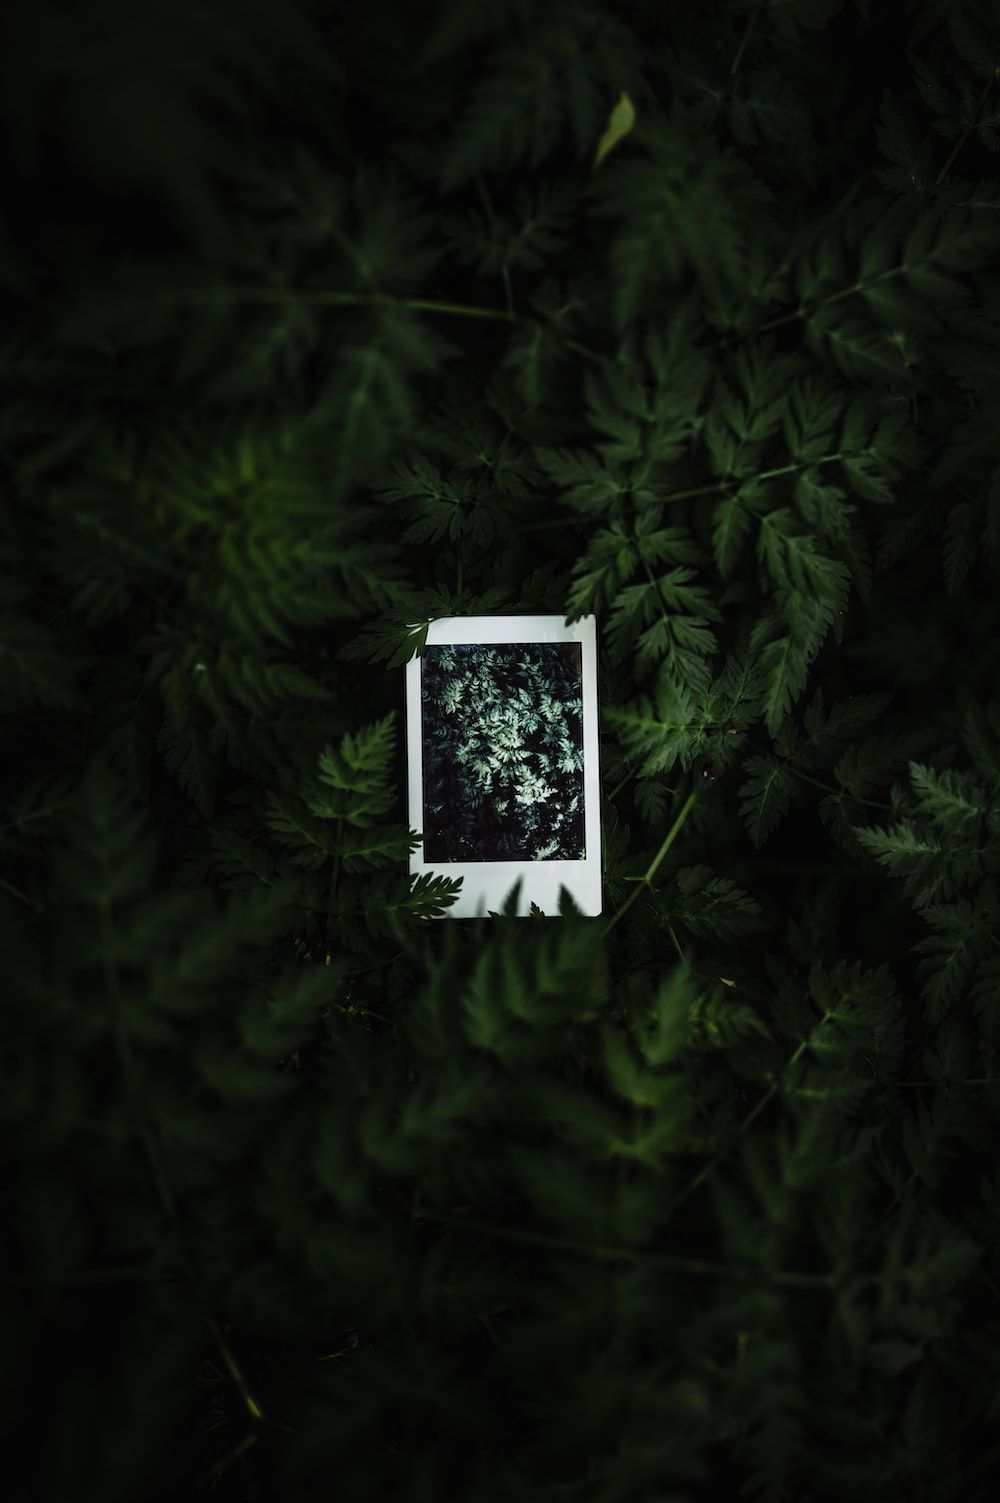 A polaroid picture of a plant in the middle of a forest photo